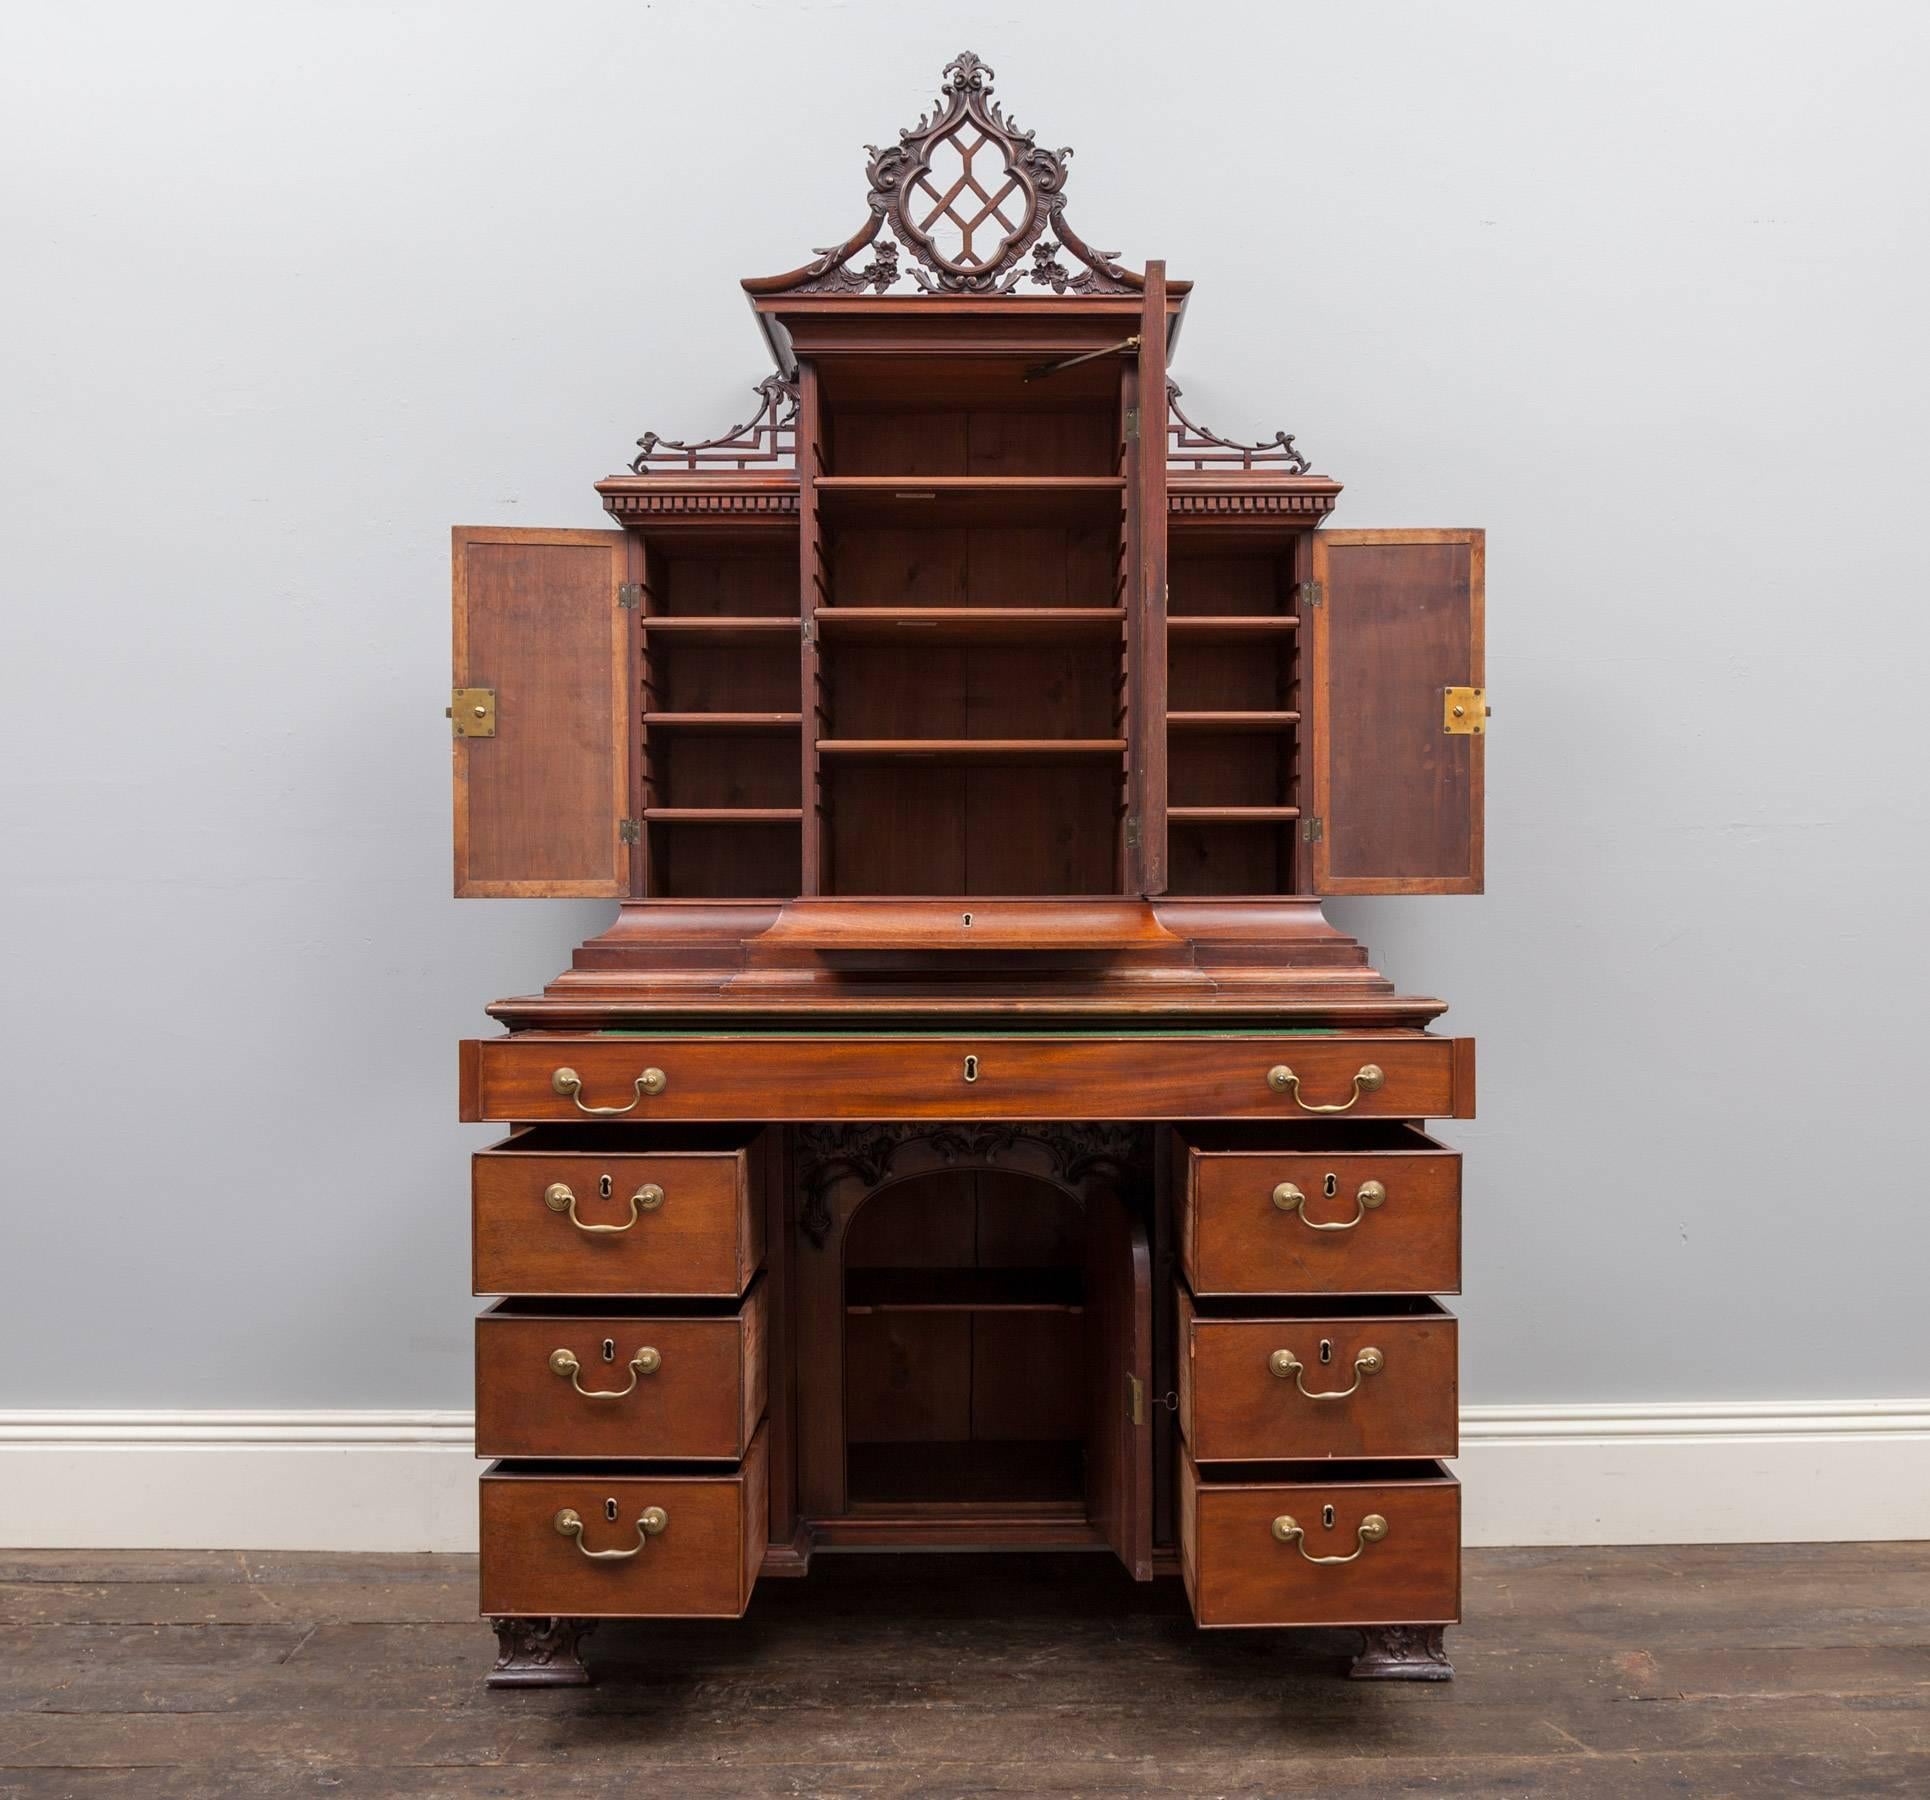 An 18th century mahogany dressing chest with bookcase and writing surface, designed by Thomas Chippendale. An attractive, practical and compact piece of English Georgian furniture in wonderful country house condition. See additional images for